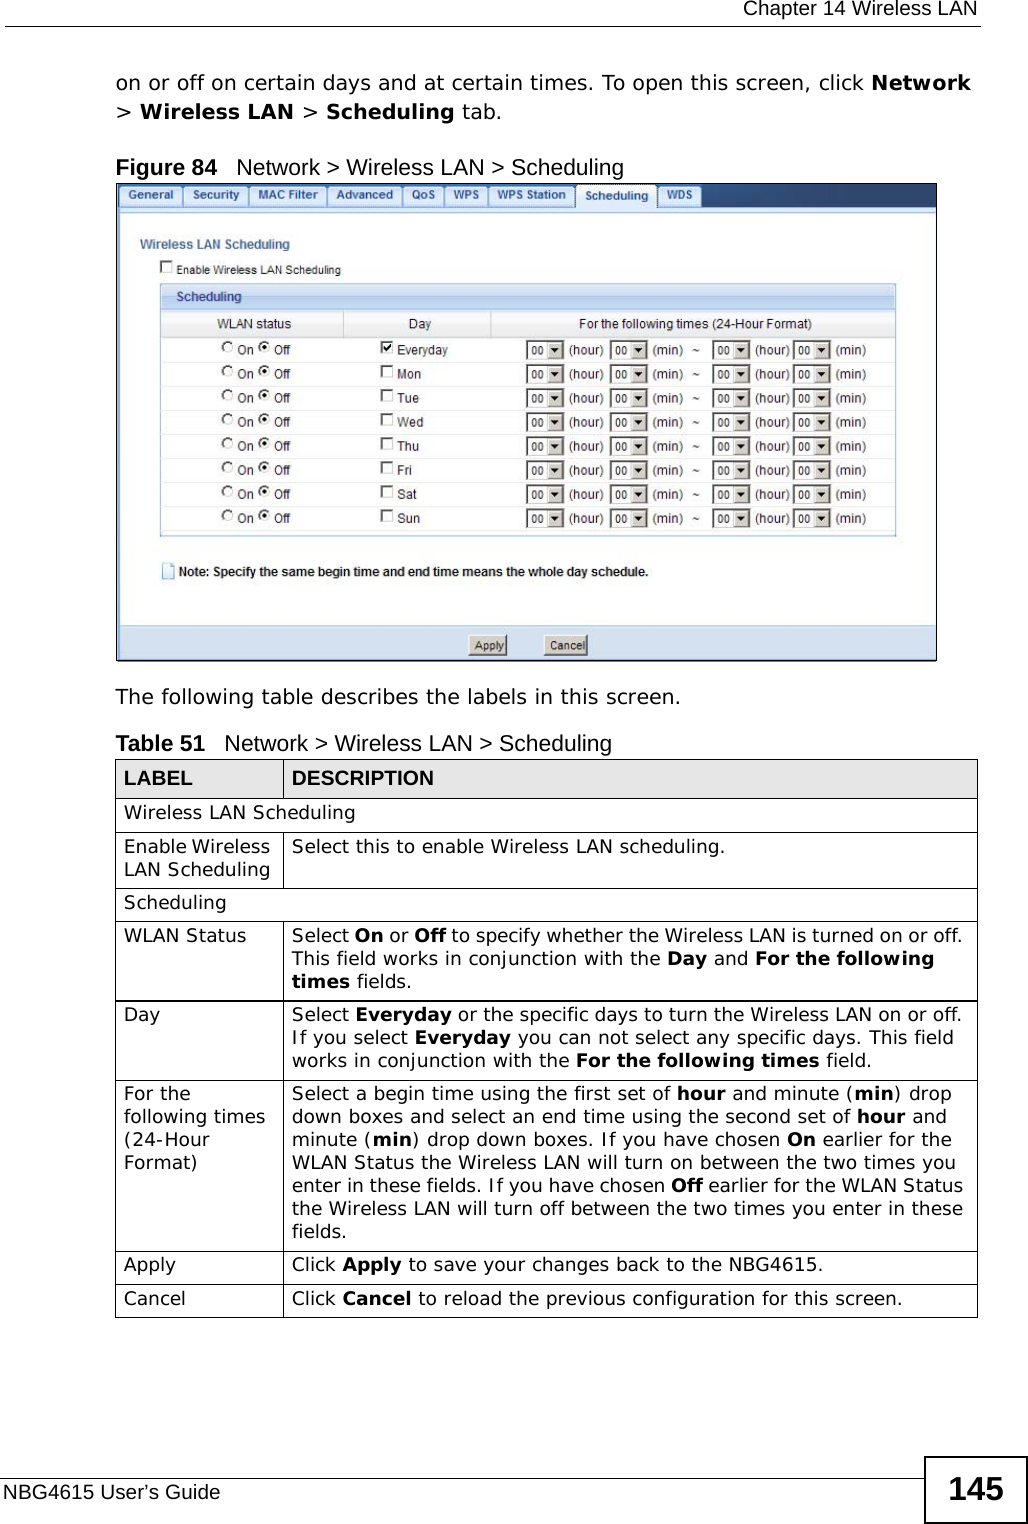  Chapter 14 Wireless LANNBG4615 User’s Guide 145on or off on certain days and at certain times. To open this screen, click Network &gt; Wireless LAN &gt; Scheduling tab.Figure 84   Network &gt; Wireless LAN &gt; SchedulingThe following table describes the labels in this screen.Table 51   Network &gt; Wireless LAN &gt; SchedulingLABEL DESCRIPTIONWireless LAN SchedulingEnable Wireless LAN Scheduling Select this to enable Wireless LAN scheduling.SchedulingWLAN Status Select On or Off to specify whether the Wireless LAN is turned on or off. This field works in conjunction with the Day and For the following times fields.Day Select Everyday or the specific days to turn the Wireless LAN on or off. If you select Everyday you can not select any specific days. This field works in conjunction with the For the following times field.For the following times (24-Hour Format)Select a begin time using the first set of hour and minute (min) drop down boxes and select an end time using the second set of hour and minute (min) drop down boxes. If you have chosen On earlier for the WLAN Status the Wireless LAN will turn on between the two times you enter in these fields. If you have chosen Off earlier for the WLAN Status the Wireless LAN will turn off between the two times you enter in these fields. Apply Click Apply to save your changes back to the NBG4615.Cancel Click Cancel to reload the previous configuration for this screen.